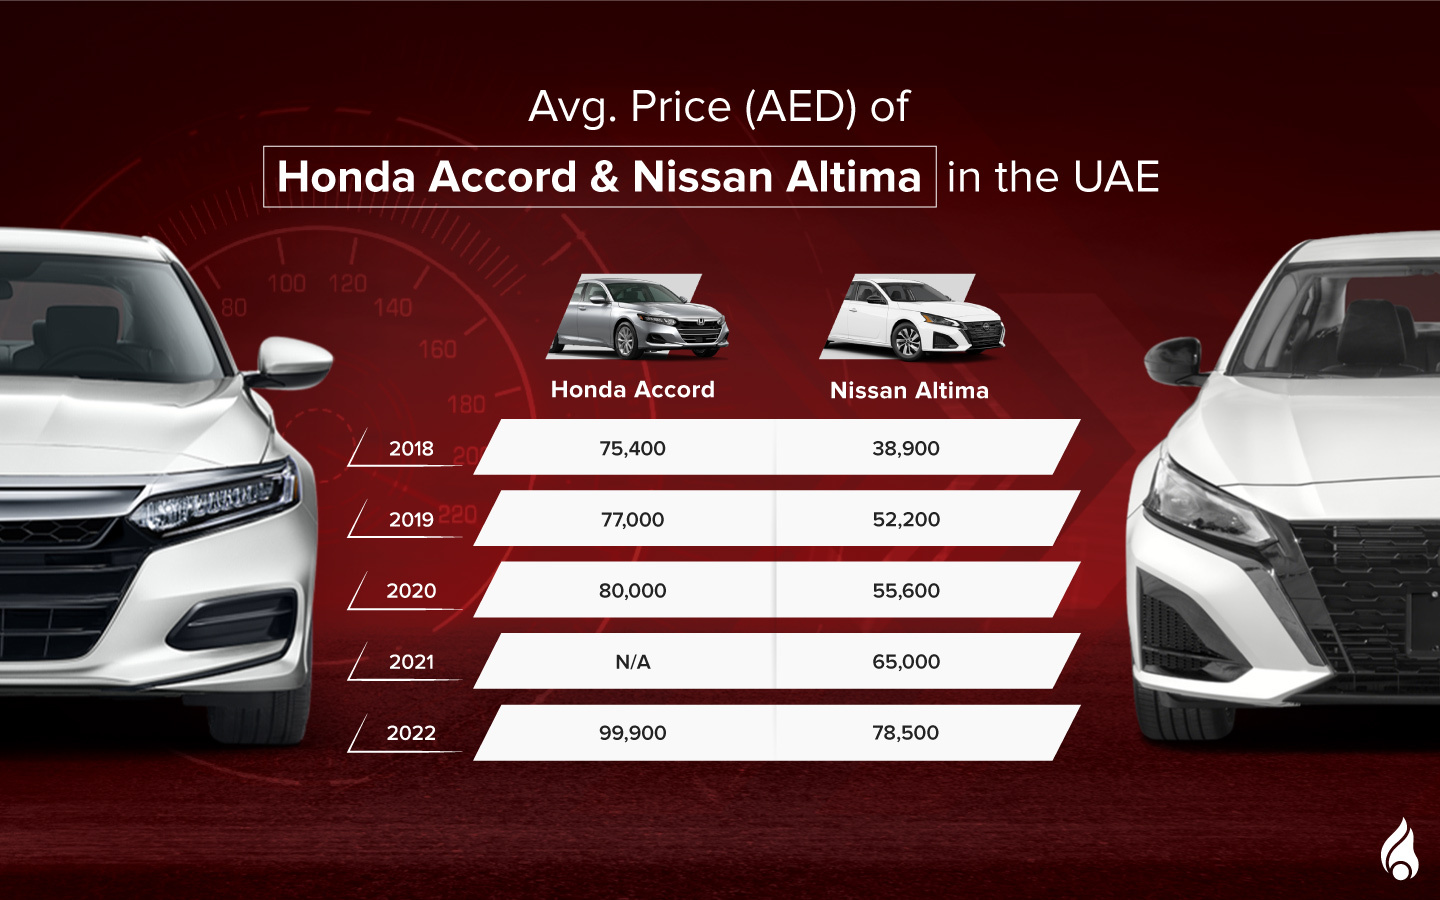 Average prices of the Honda Accord and Nissan Altima